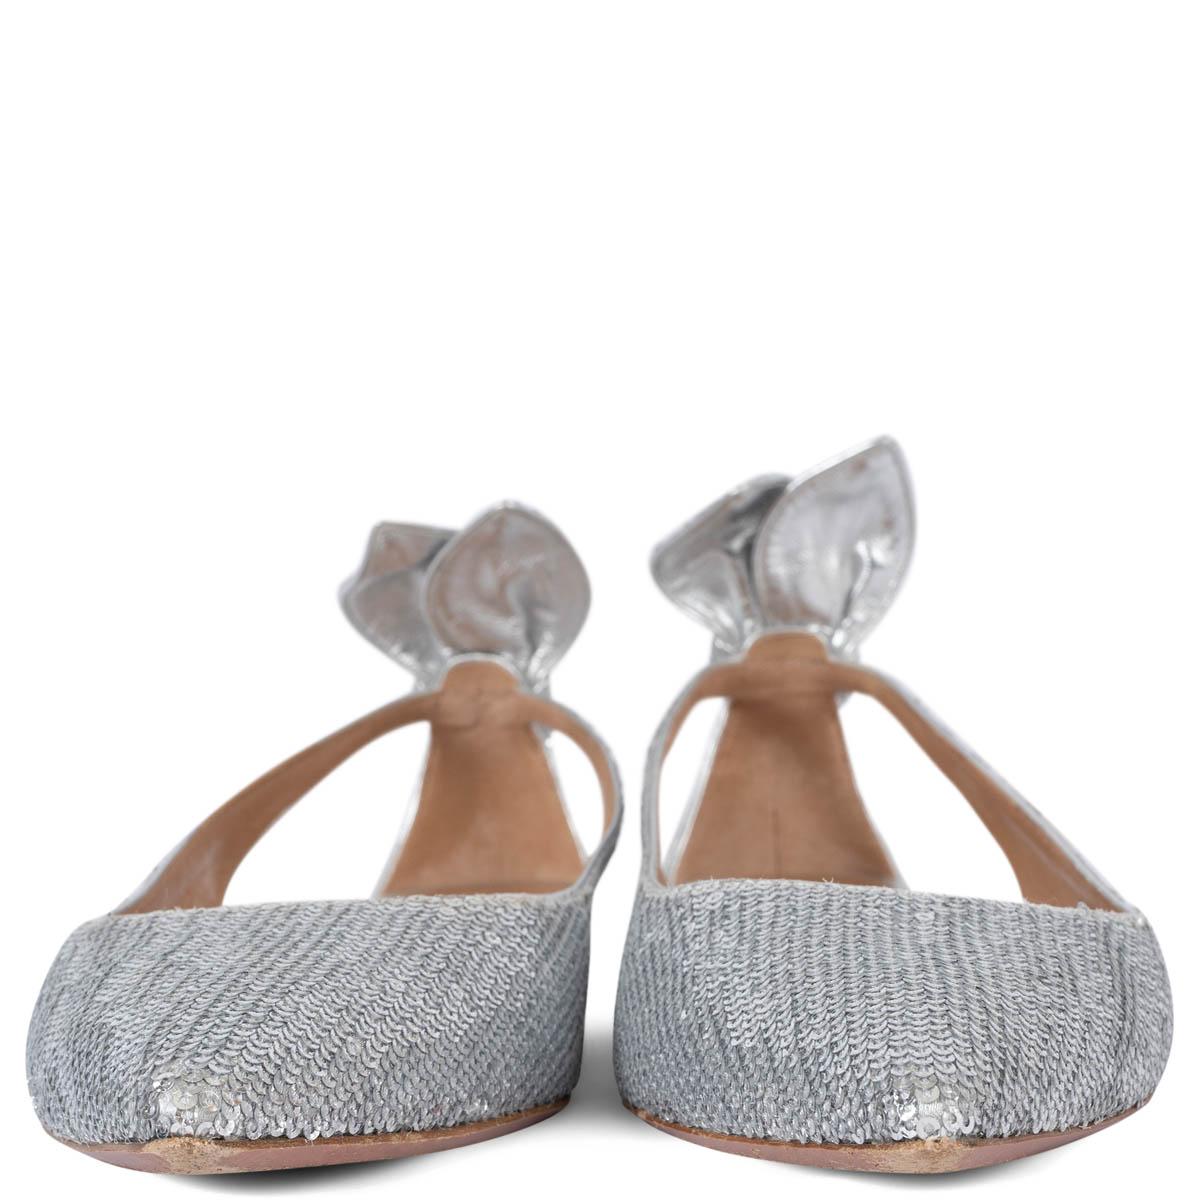 100% authentic Aquazzura Bow Tie ballet flats are crafted from silver-tone sequins featuring polished silver heel, pointed-toe and cut-out detailing with tie-knots at the heel counter. Have been worn and are in excellent condition.